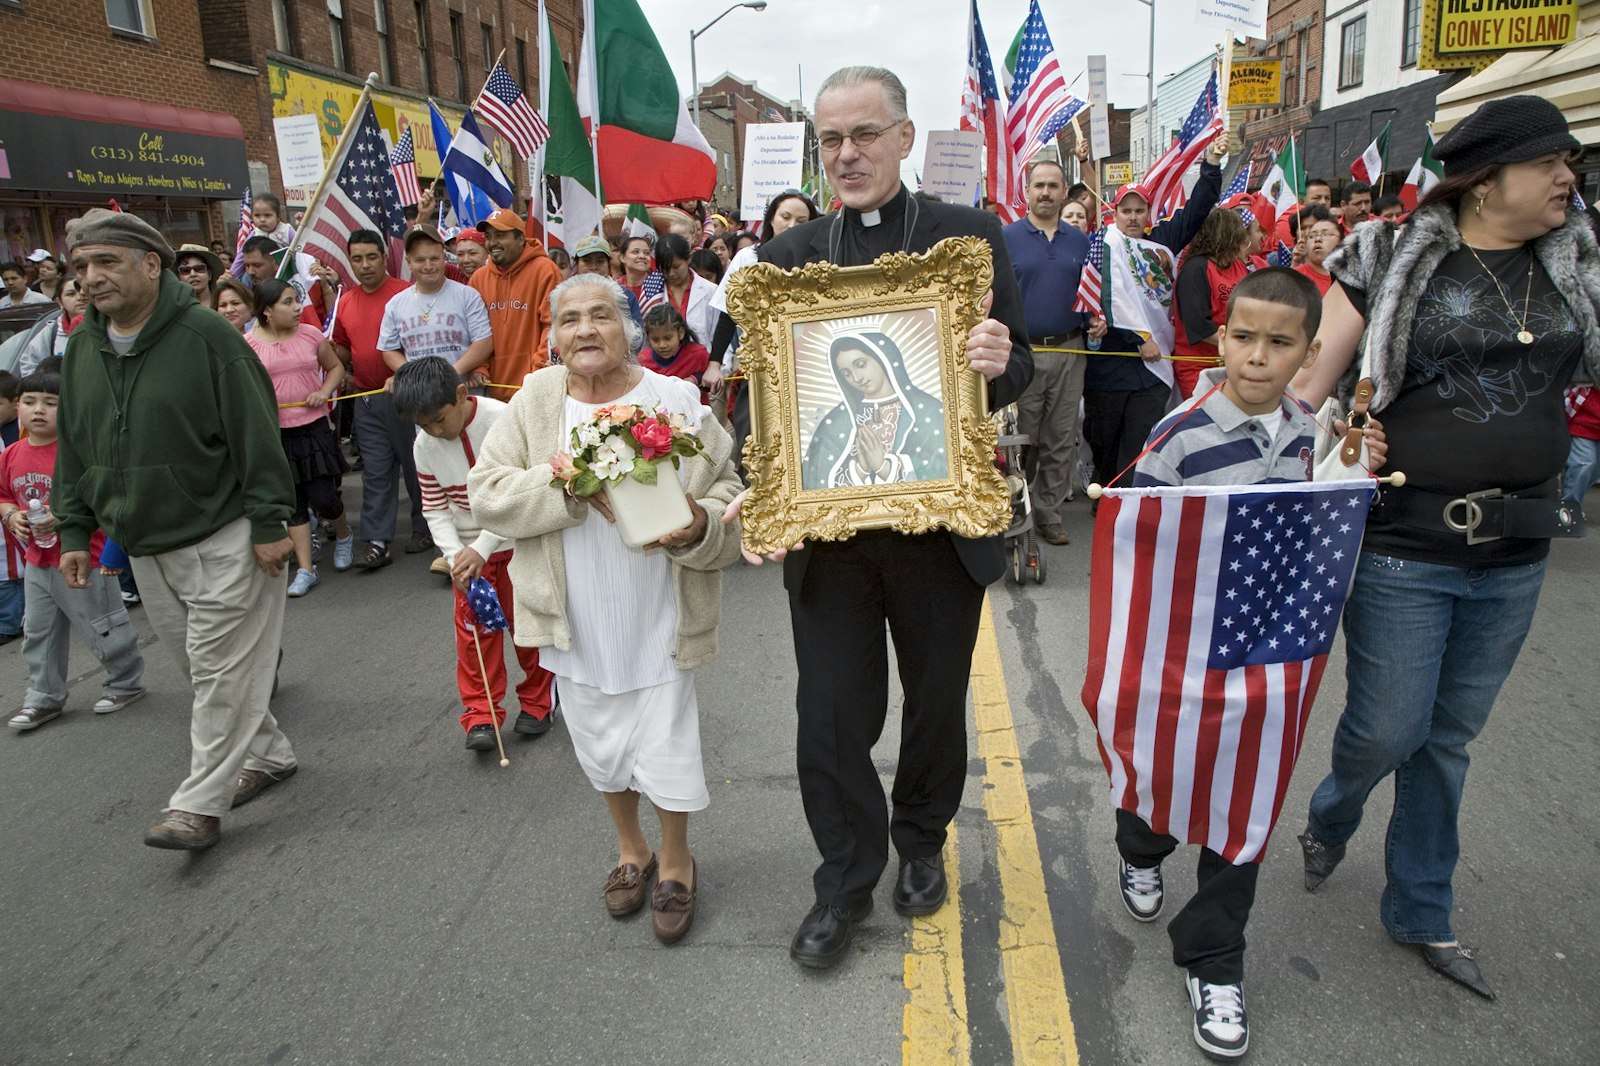 Then-Msgr. Donald Hanchon holds an image of Our Lady of Guadalupe as he marches with other protesters during a May 2007 immigration rally in downtown Detroit. Msgr. Hanchon joined thousands of demonstrators in the heavily Hispanic neighborhood, demanding legal rights for illegal immigrants. (Jim West | Detroit Catholic file photo)